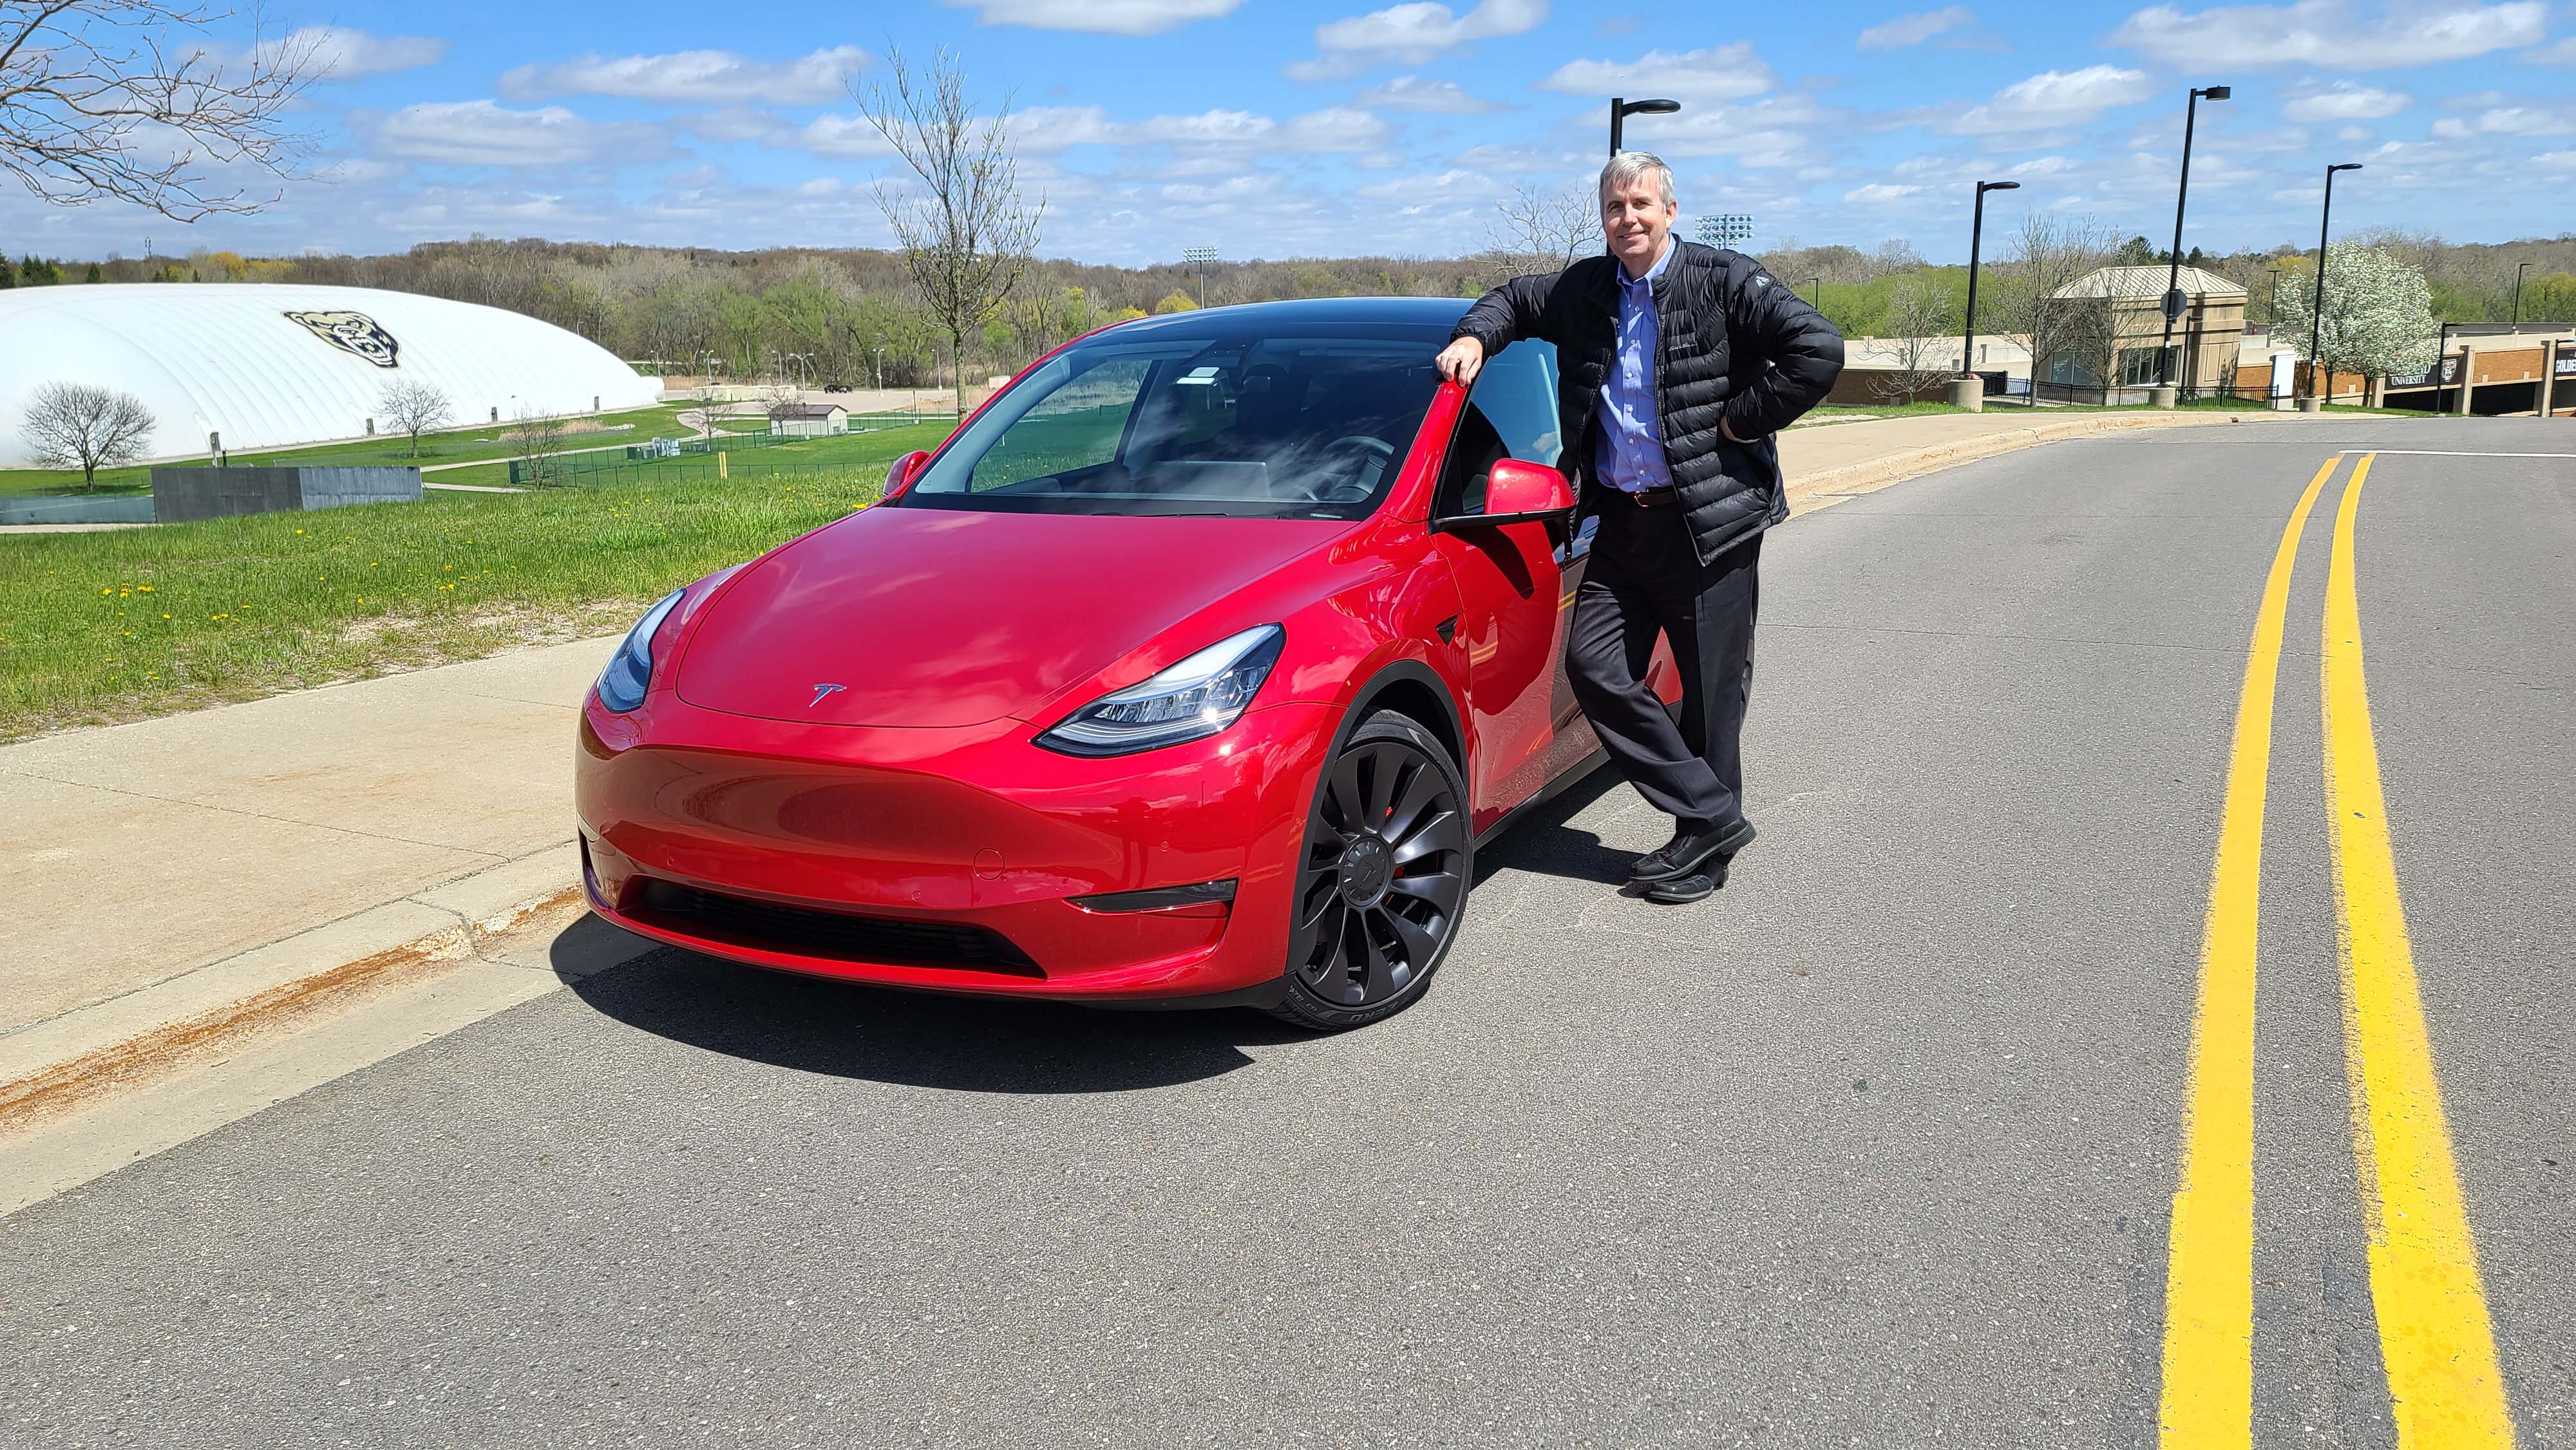 Detroit News auto columnist Henry Payne got a ride in one of the first Tesla Model Ys in Michigan. Payne is the owner of a Model 3 sedan himself.